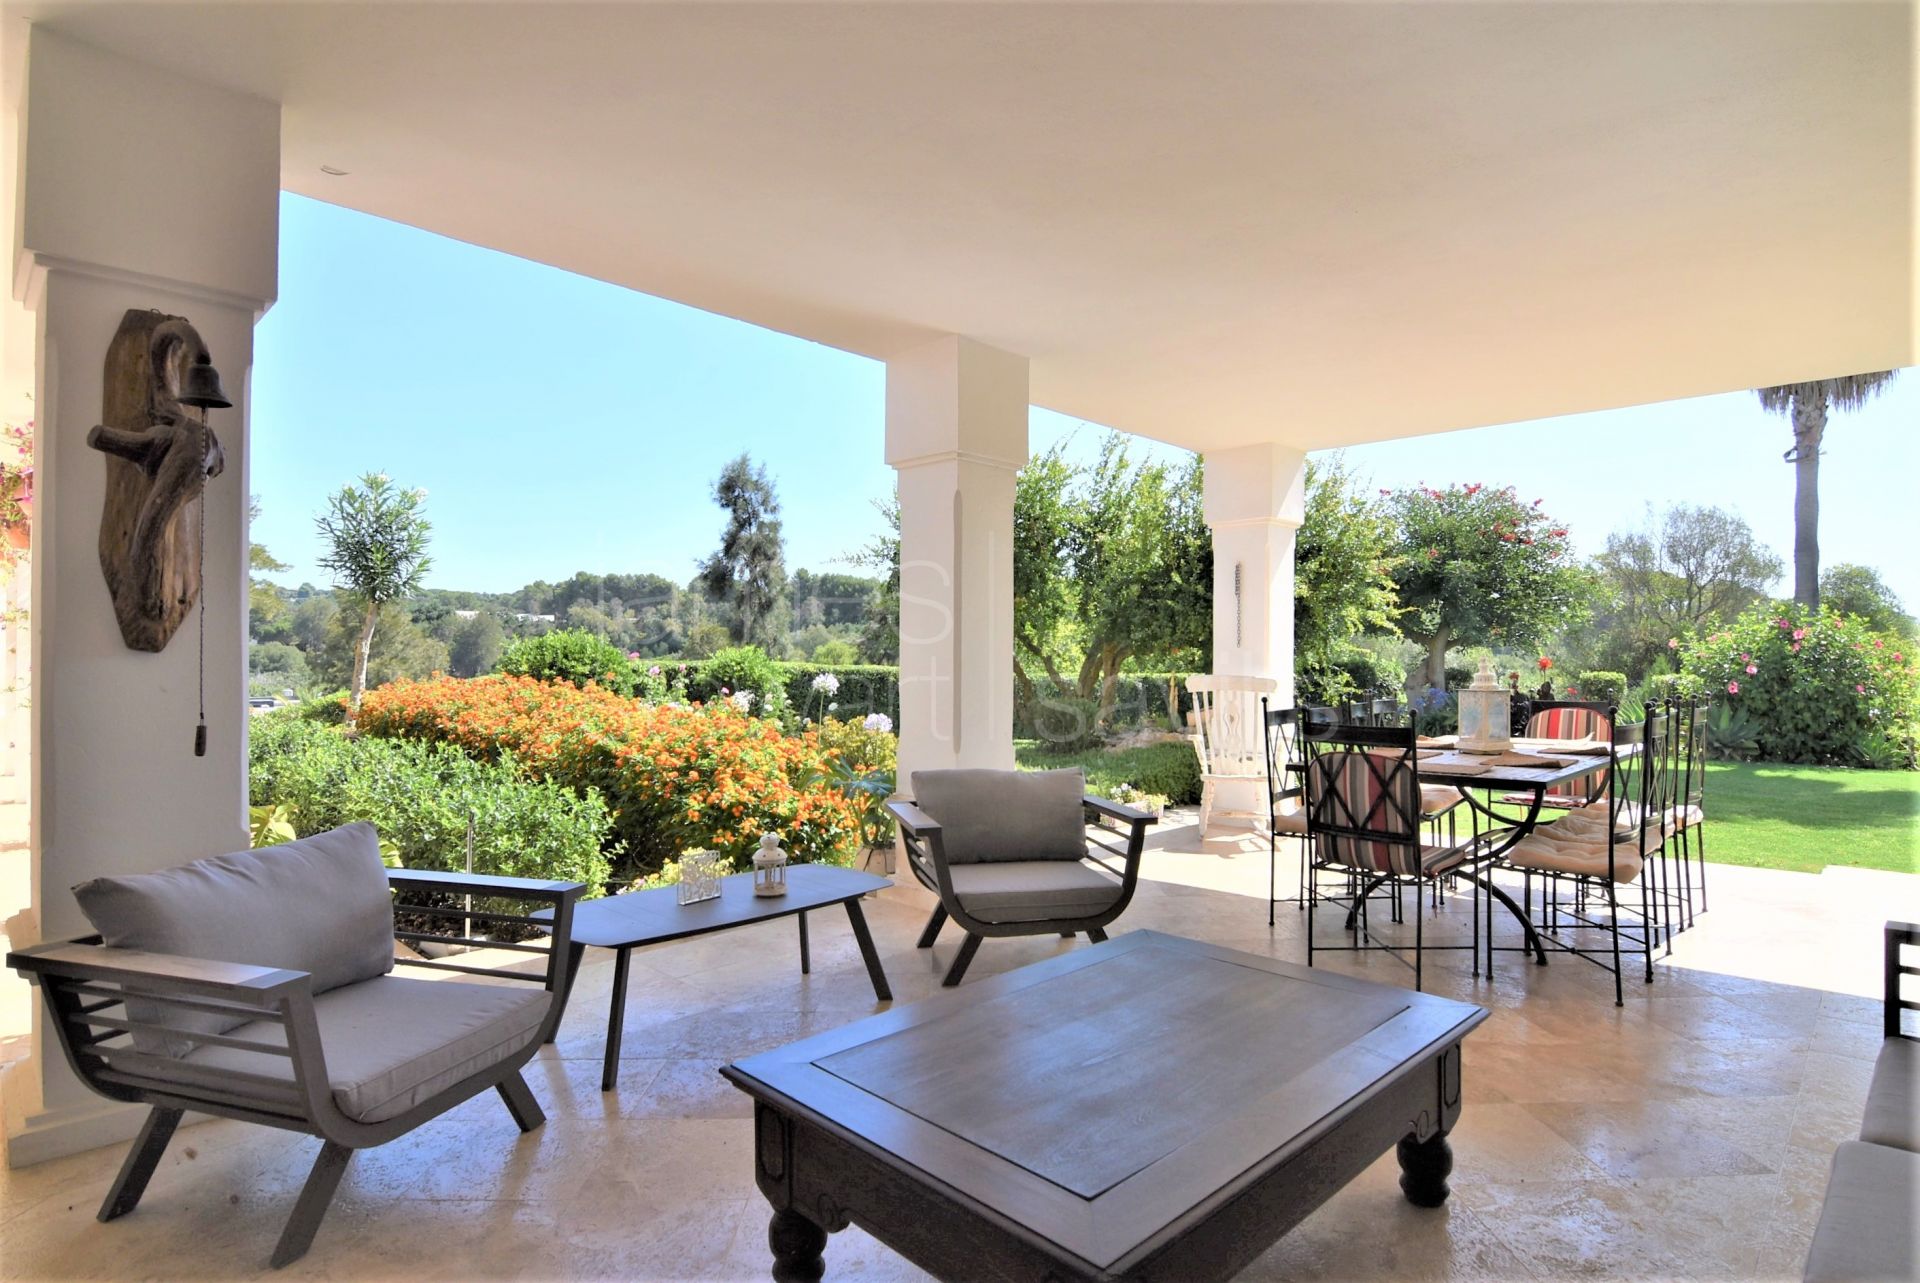 A lovely family home close to Real Valderrama GC with mature gardens and separate apartment